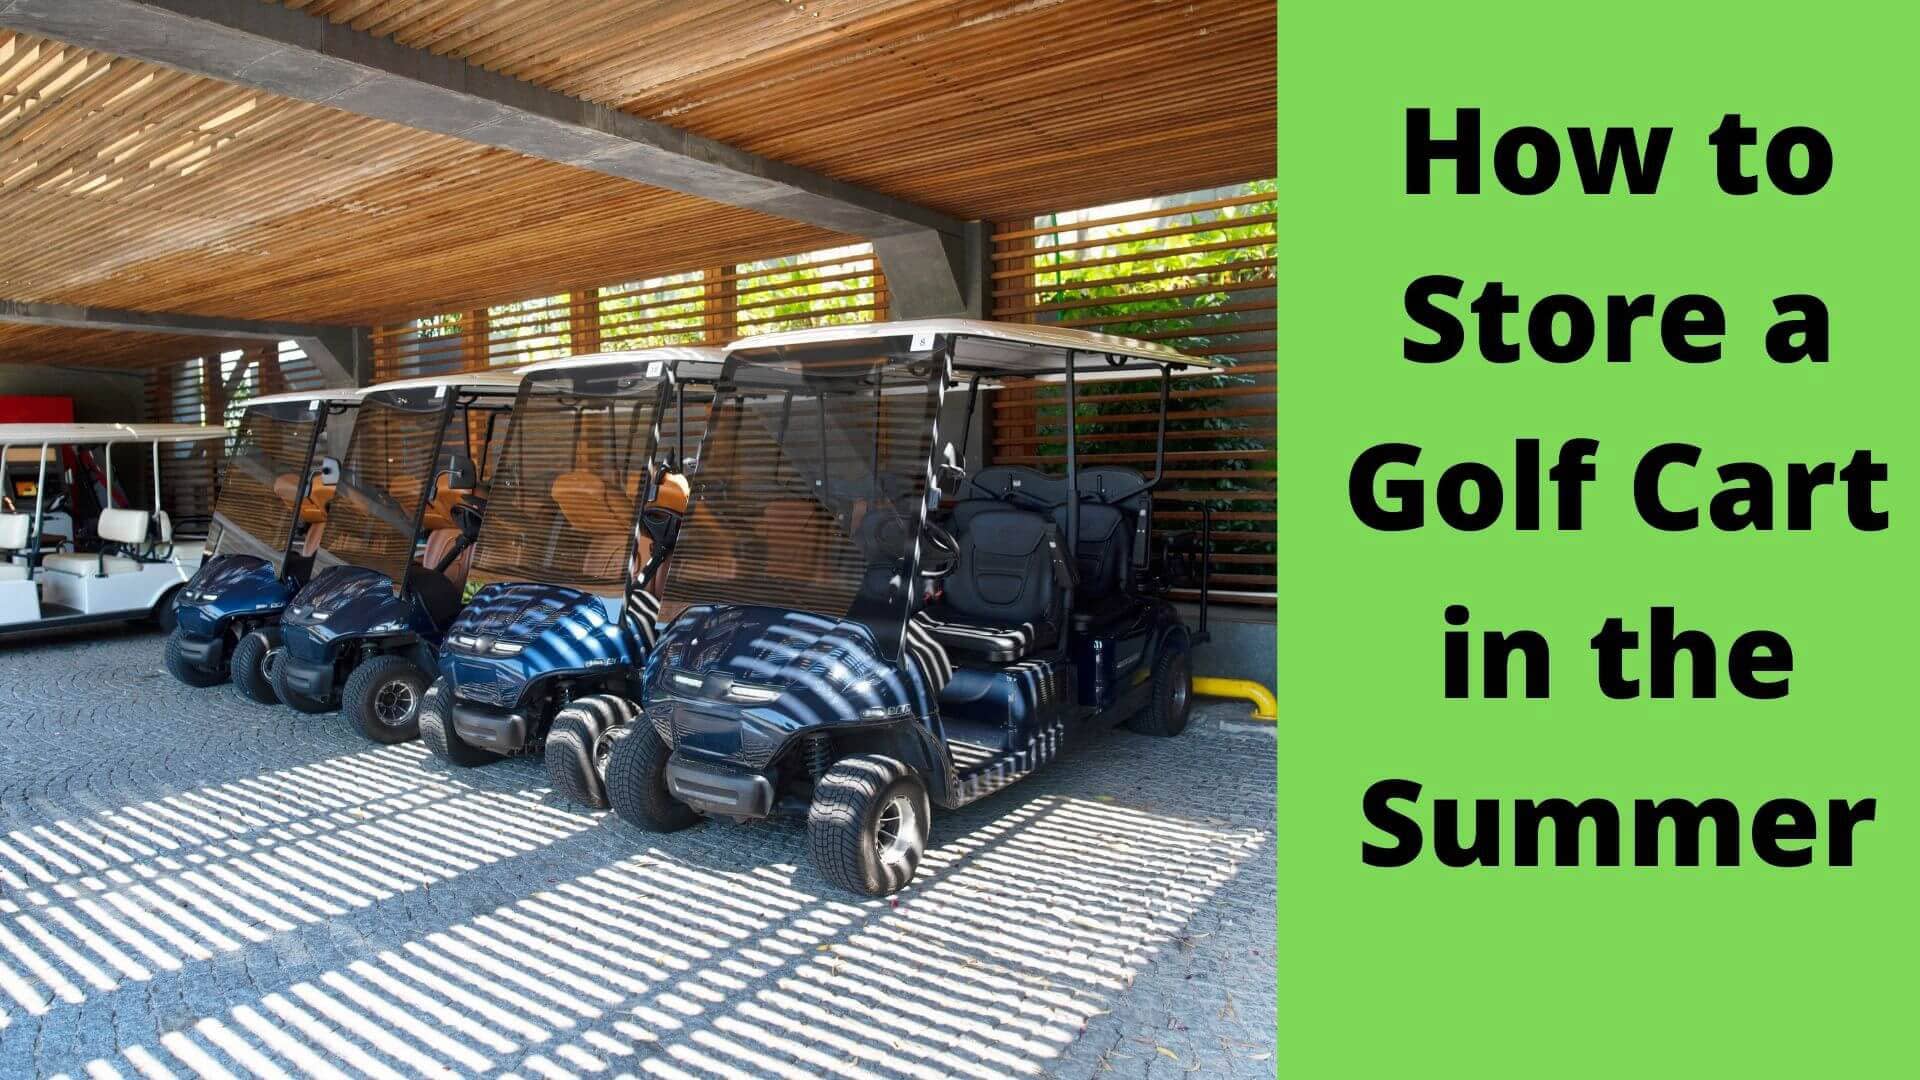 How to Store a Golf Cart in the Summer